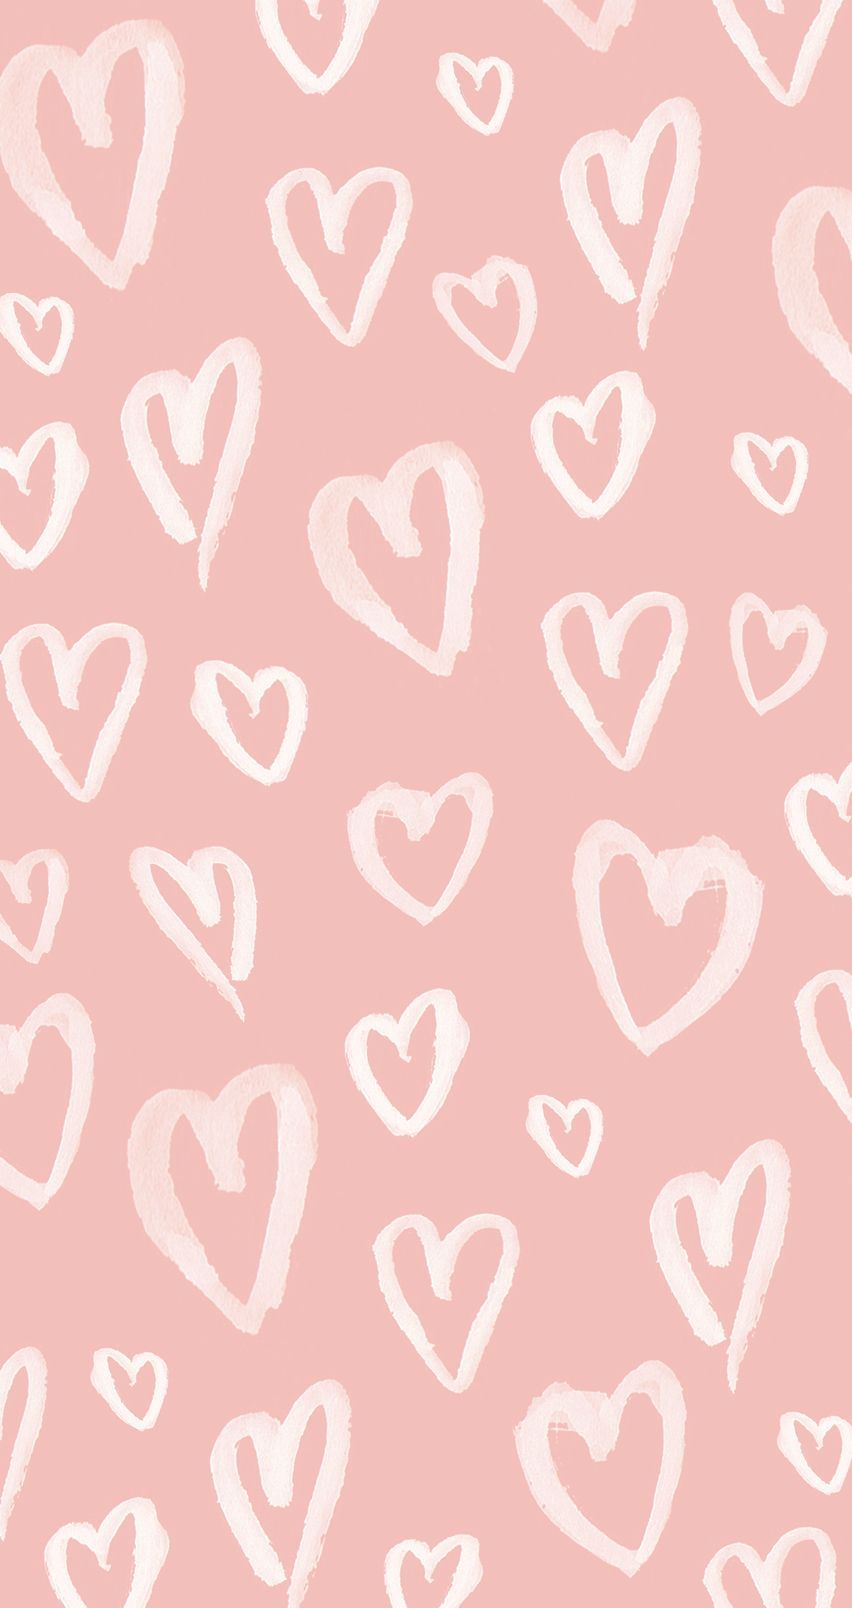 A pink background with hearts on it - Heart, pink heart